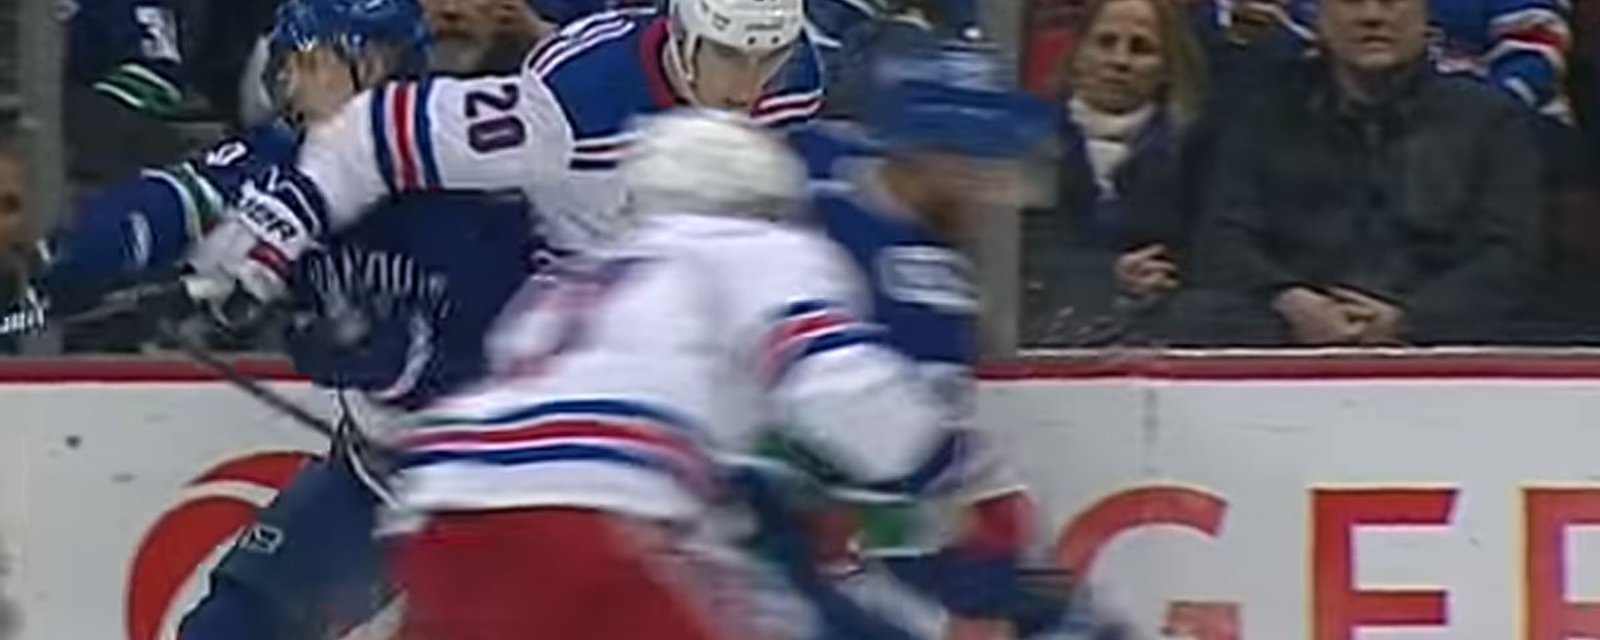 Breaking: NHL hands out ruling in Kreider's elbow to Pettersson's head